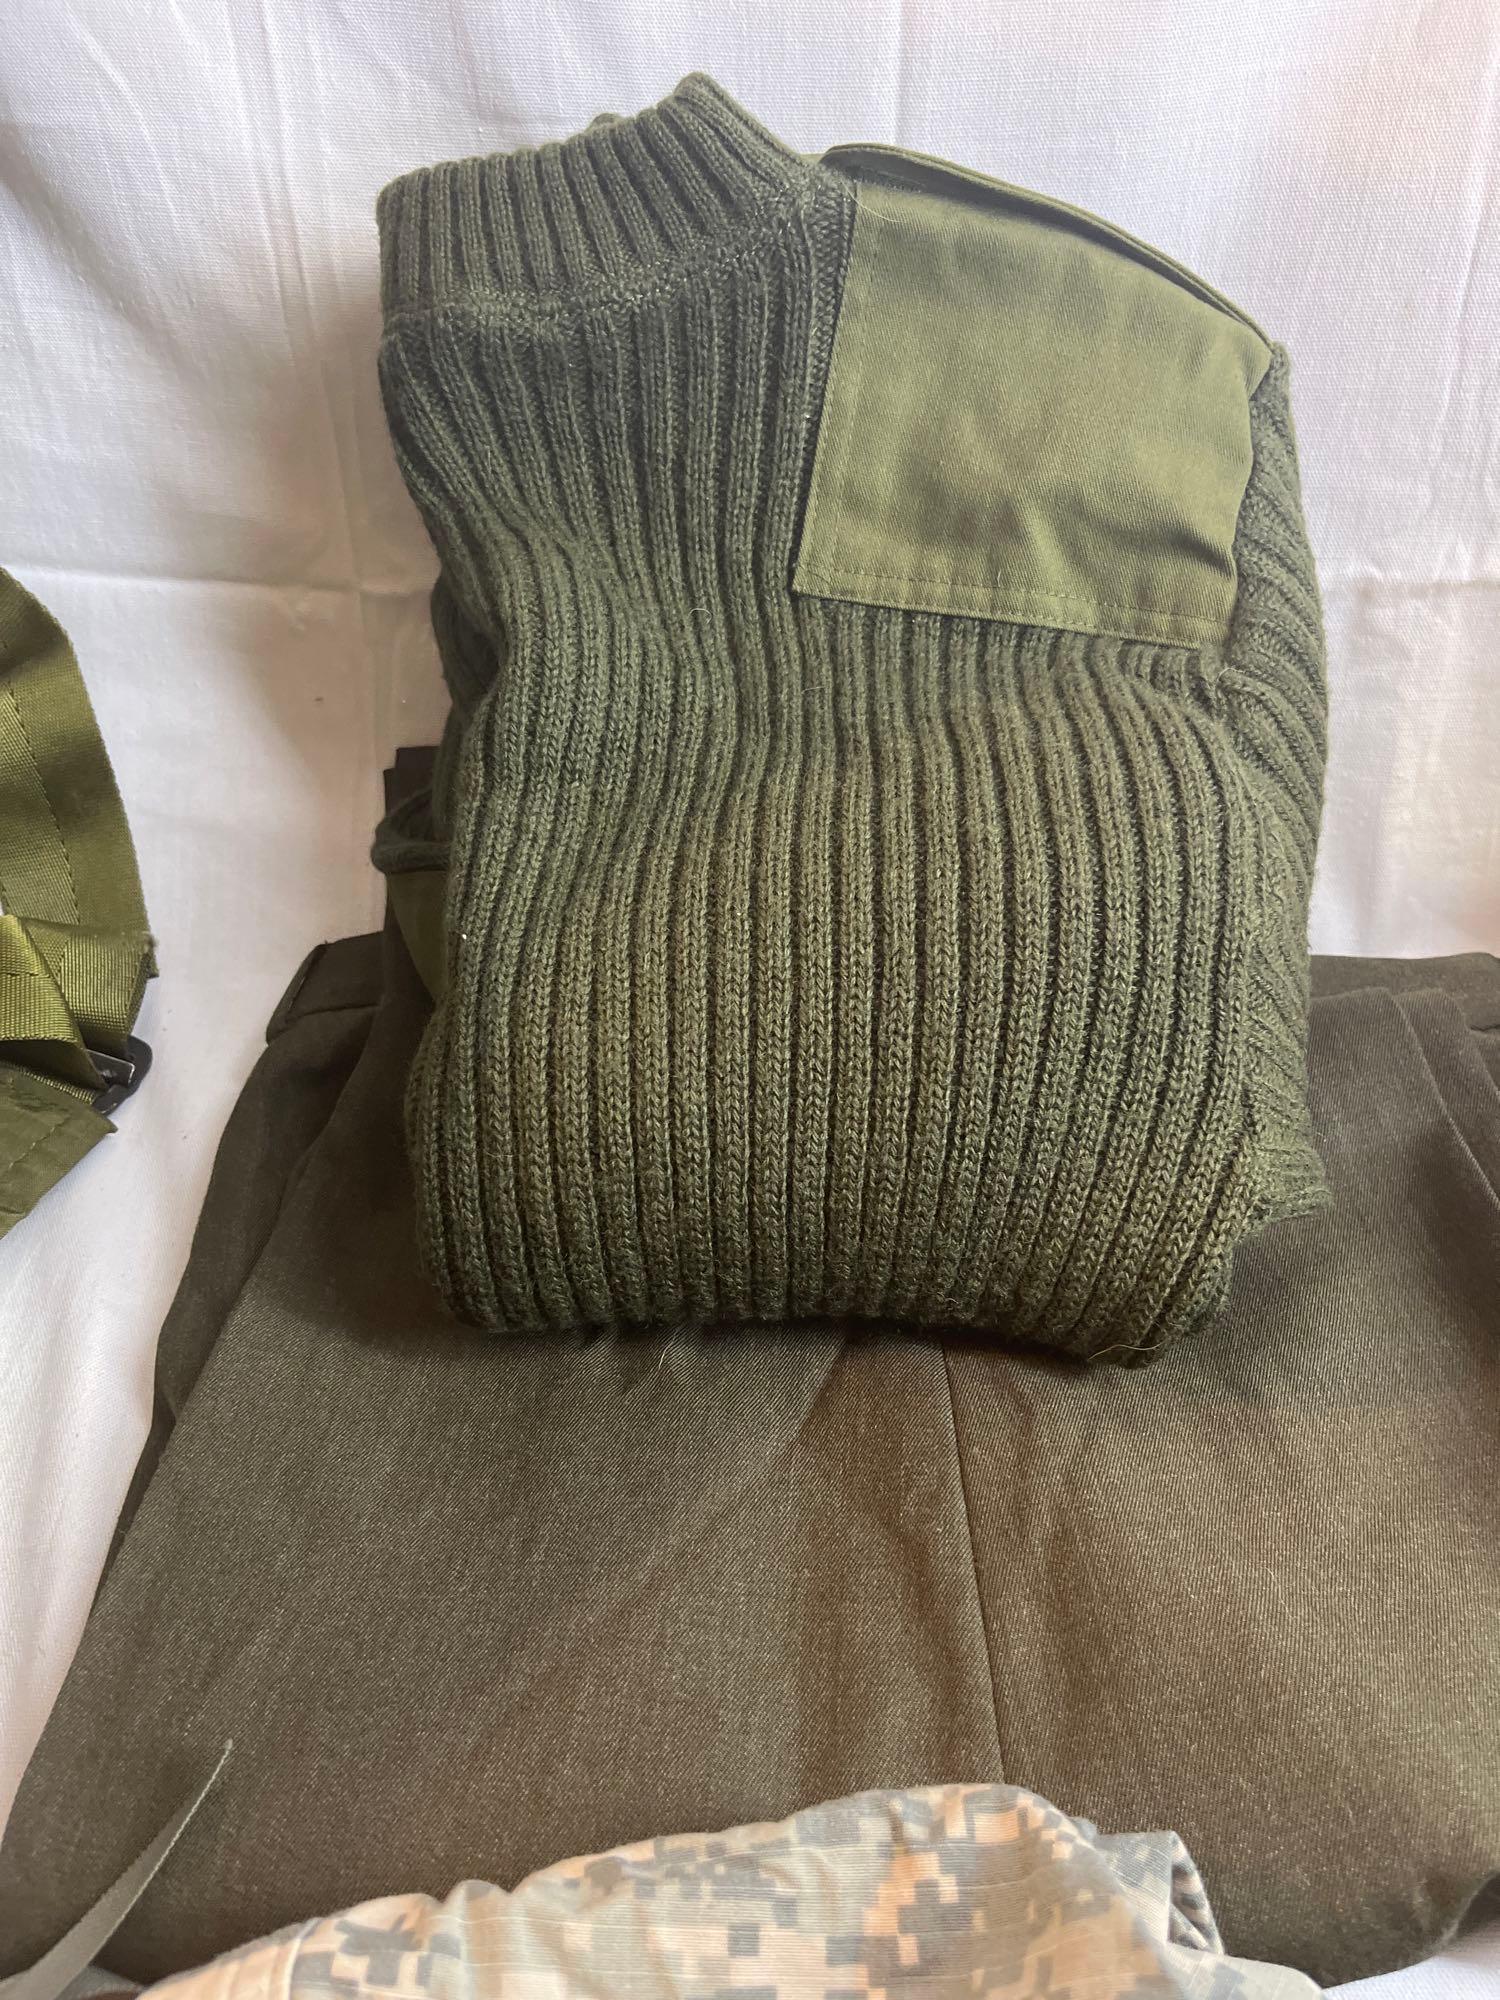 Lot of military surplus, clothes, boots, bag